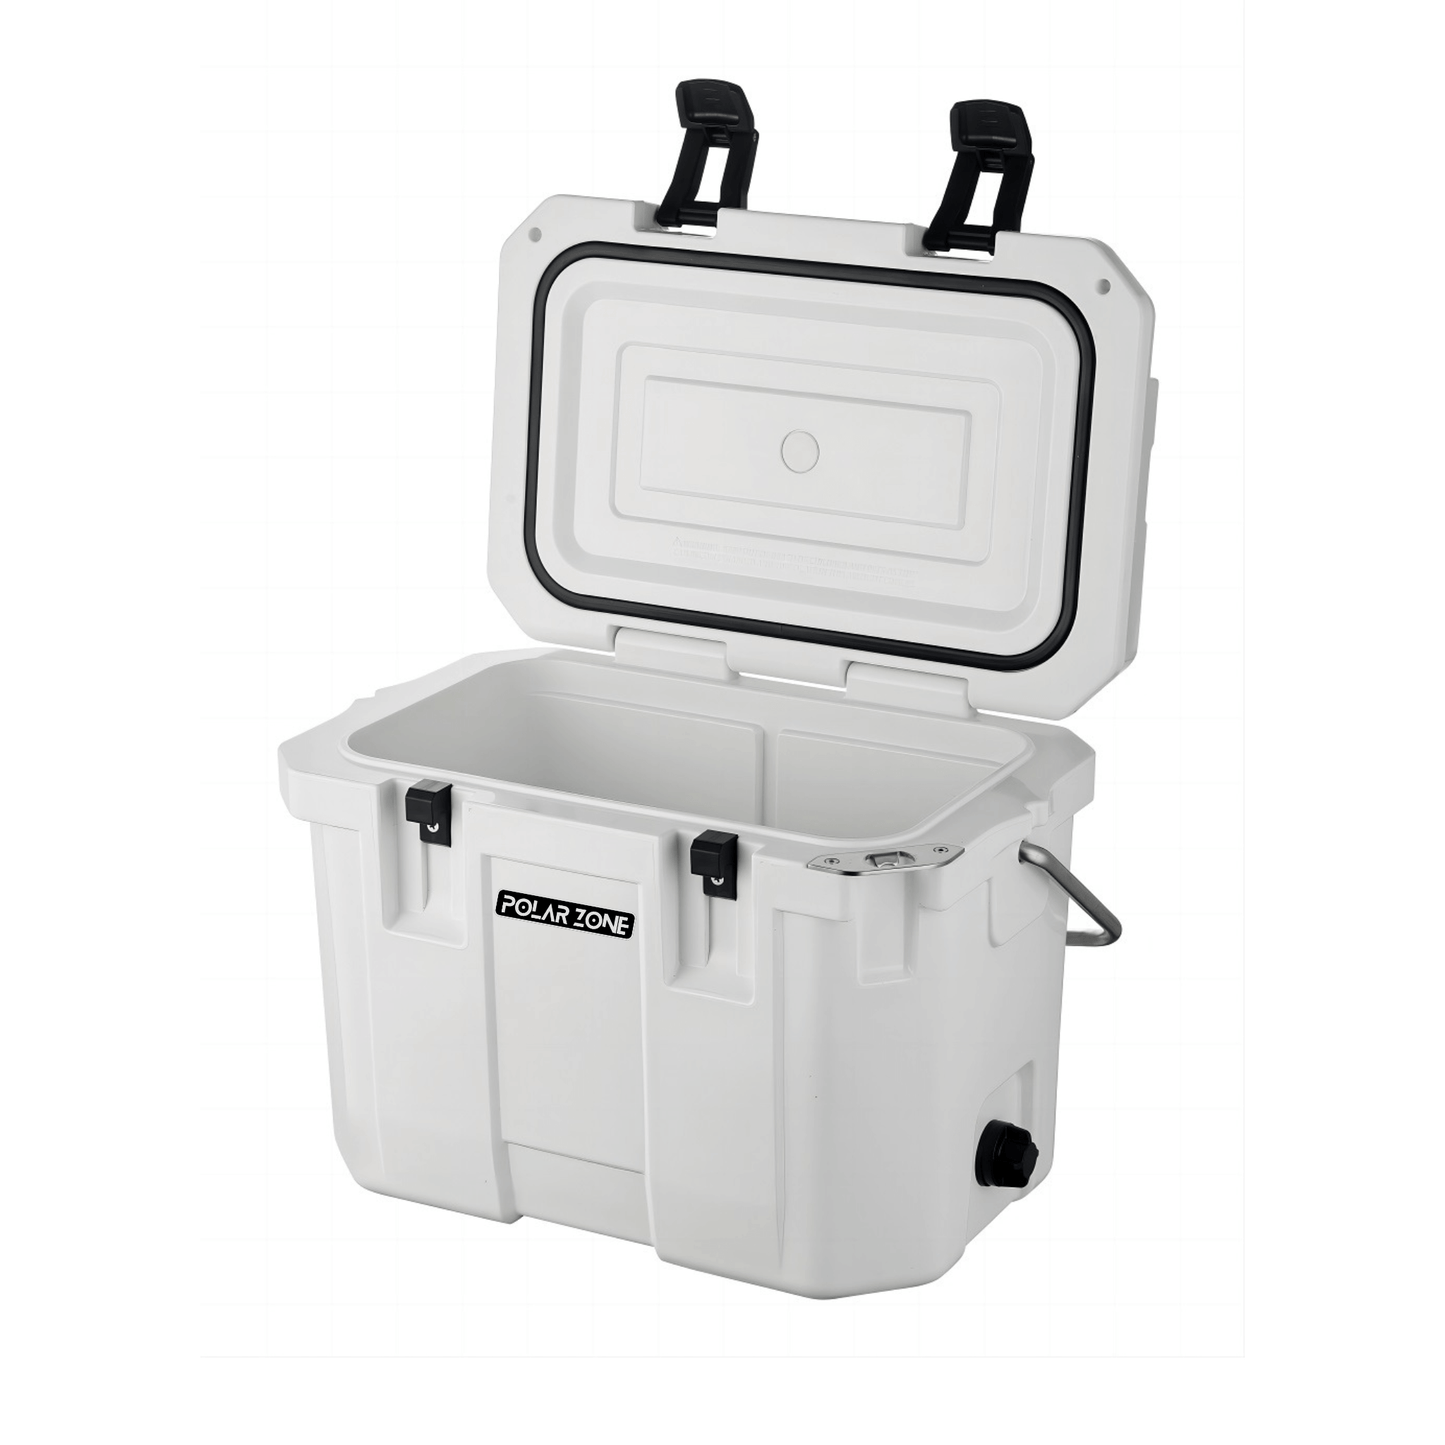 Polar Zone Hard Cooler for Camping, Fishing and Outdoor-Advent 25 Icebox